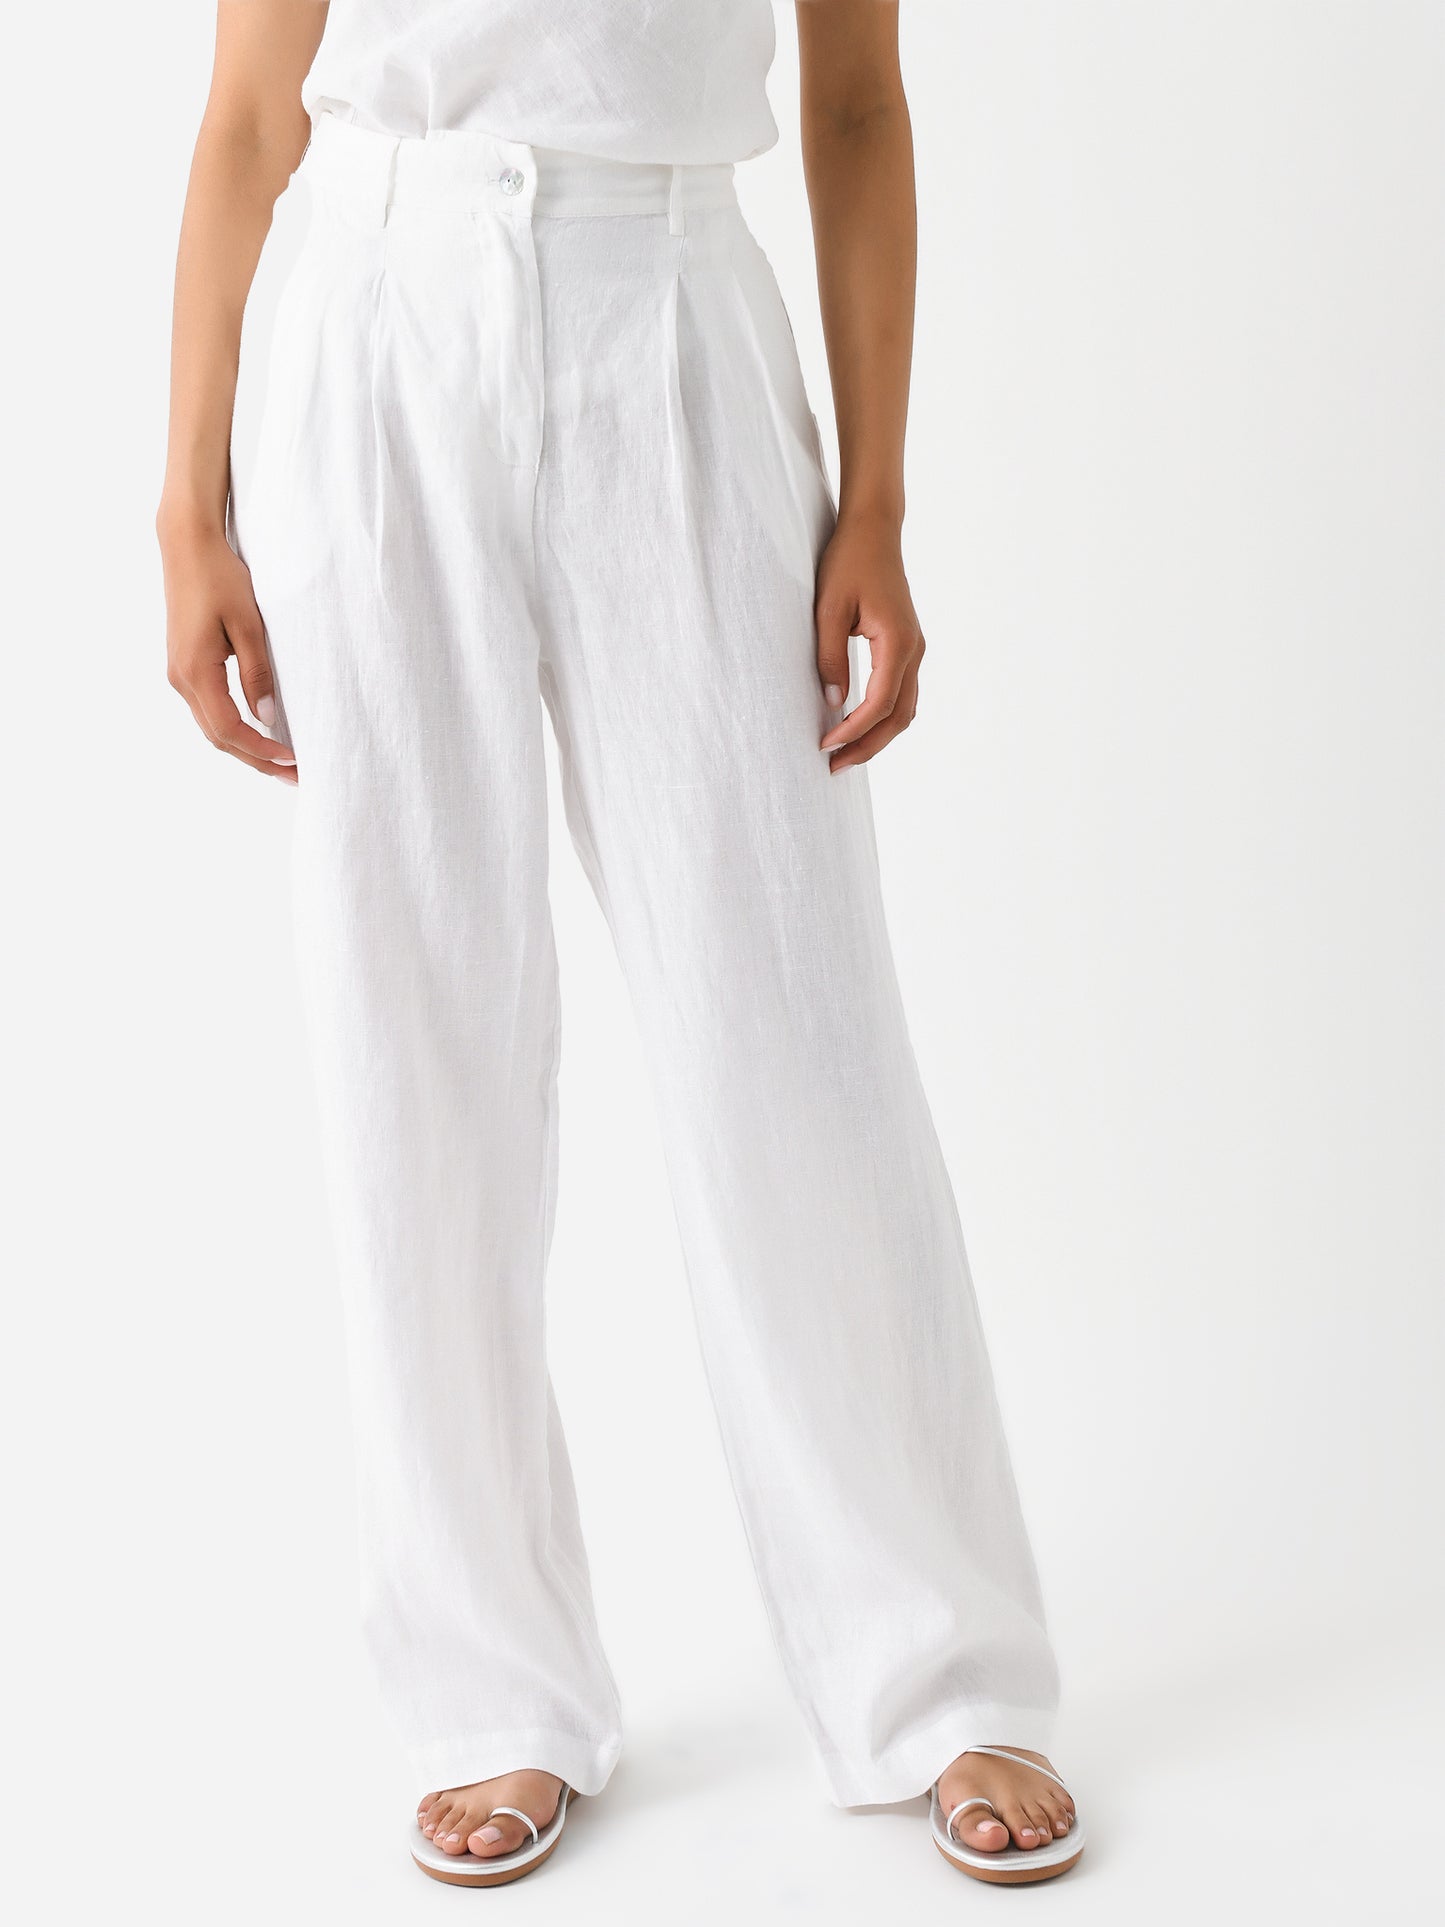 DONNI. Women's The Linen Pleated Pant